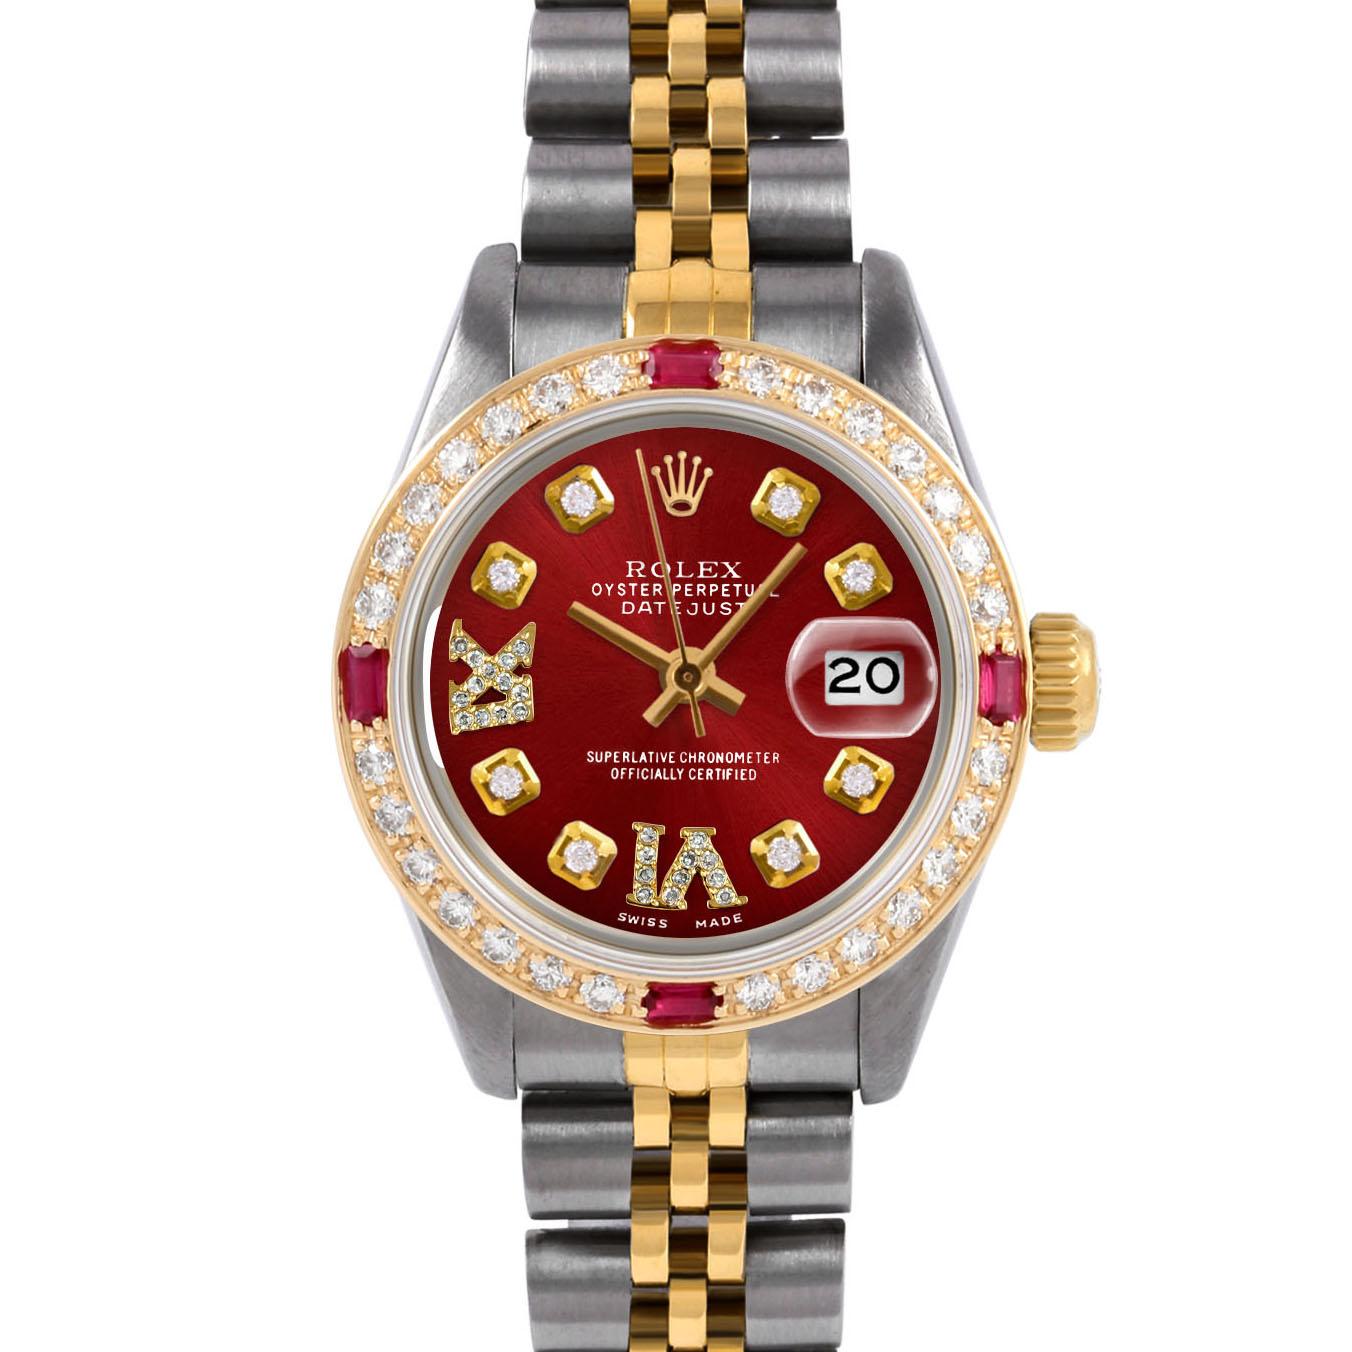 Swiss Wrist - SKU 6917-TT-RED-8DR69-BDS-JUB

Brand : Rolex
Model : Datejust (Non-Quickset Model)
Gender : Ladies
Metals : 14K/Stainless Steel
Case Size : 26 mm

Dial : Custom Red Roman Diamond Dial (This dial is not original Rolex And has been added